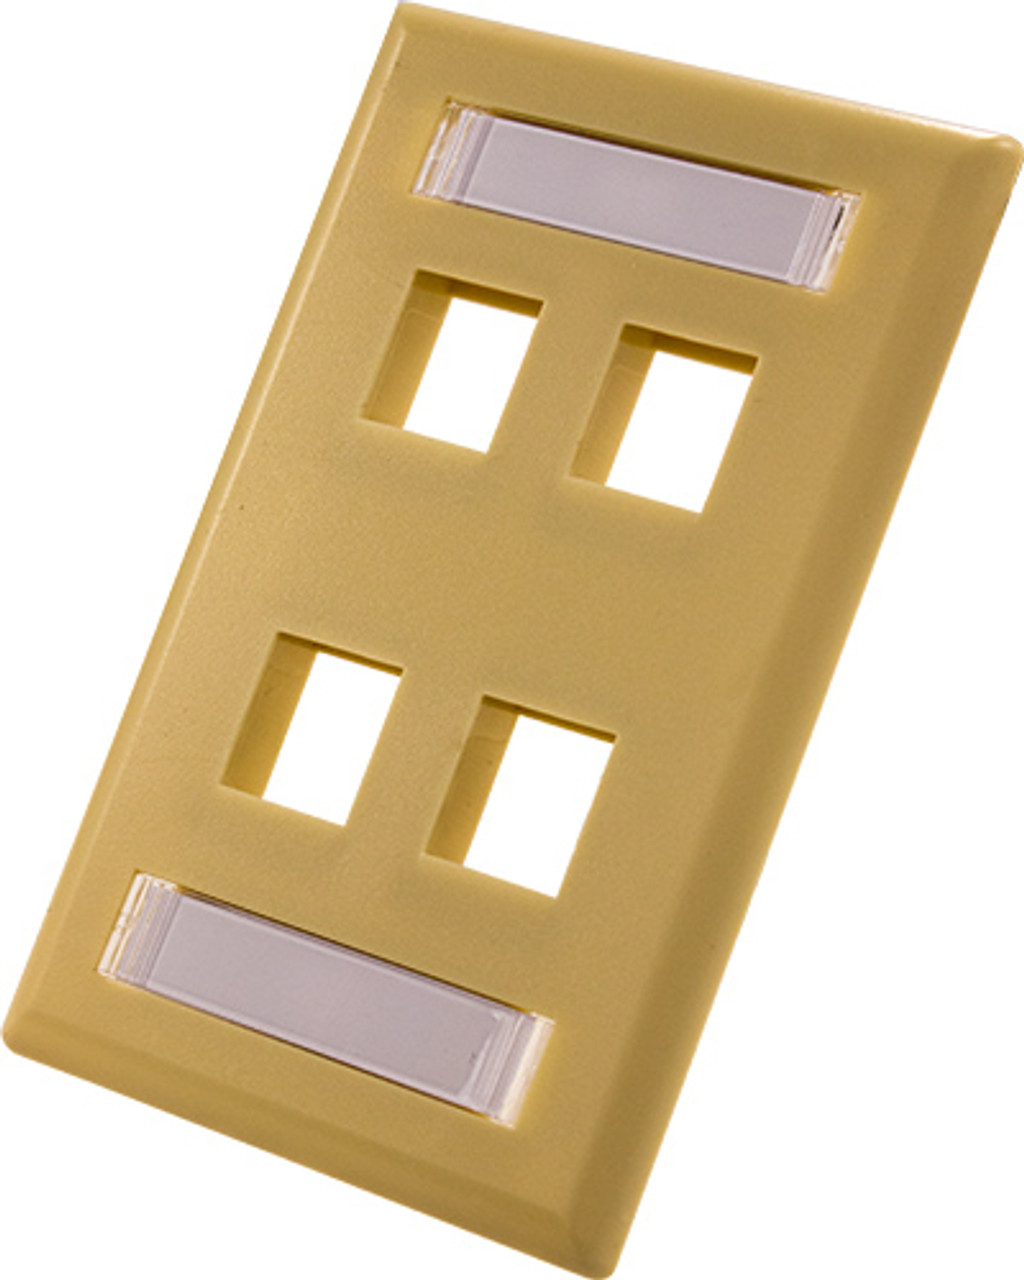 Wall Plate With ID Window, 4-Port, Ivory